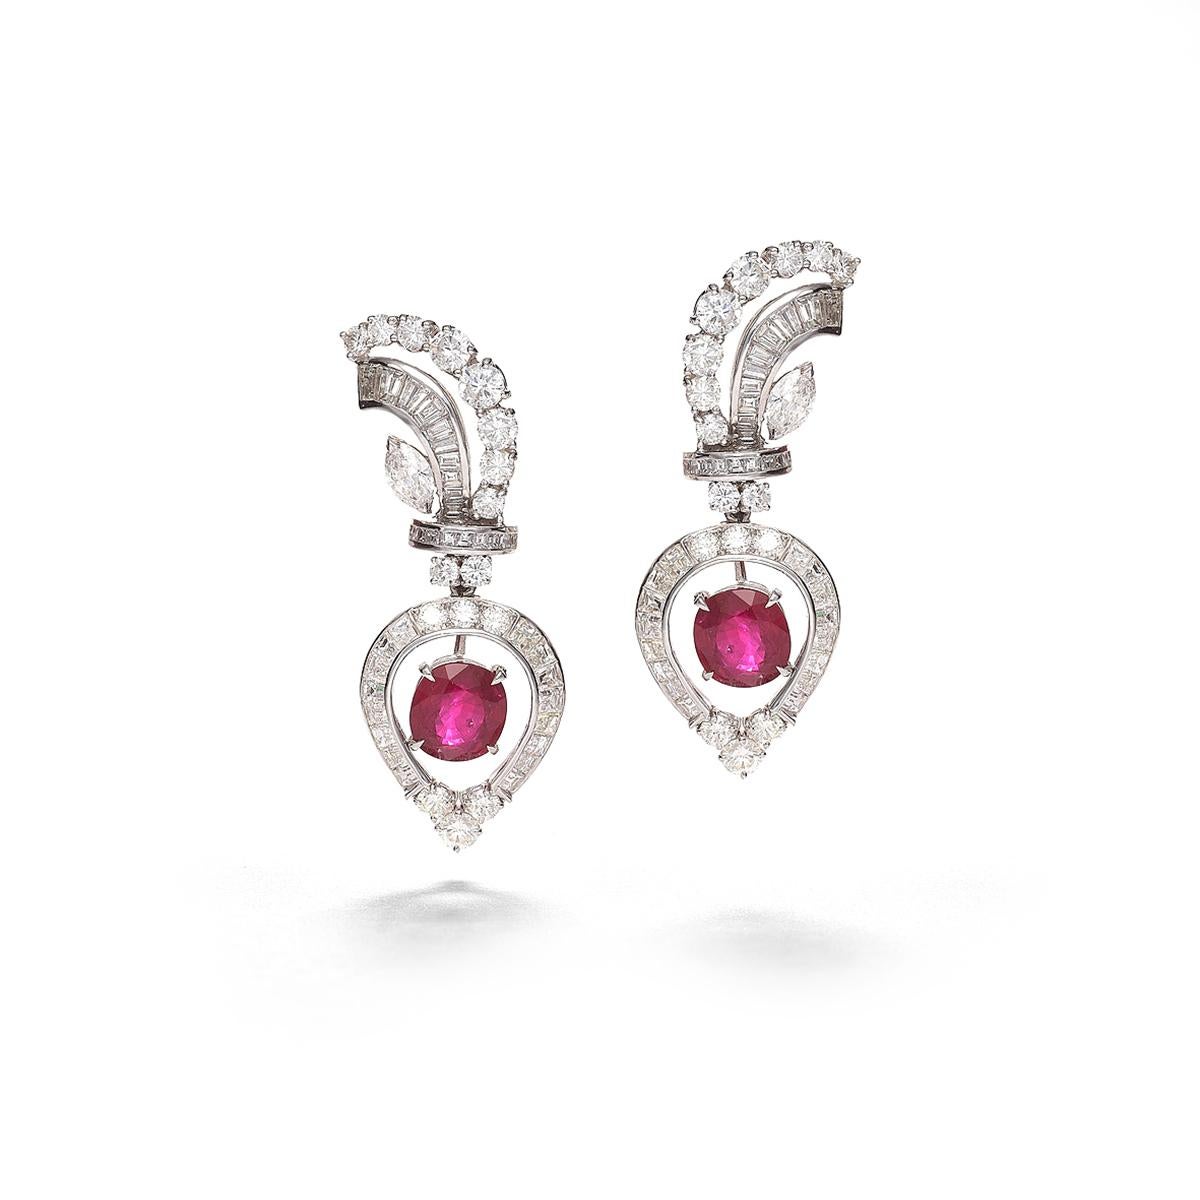 Contemporary Diamond Earrings with Rubies For Sale